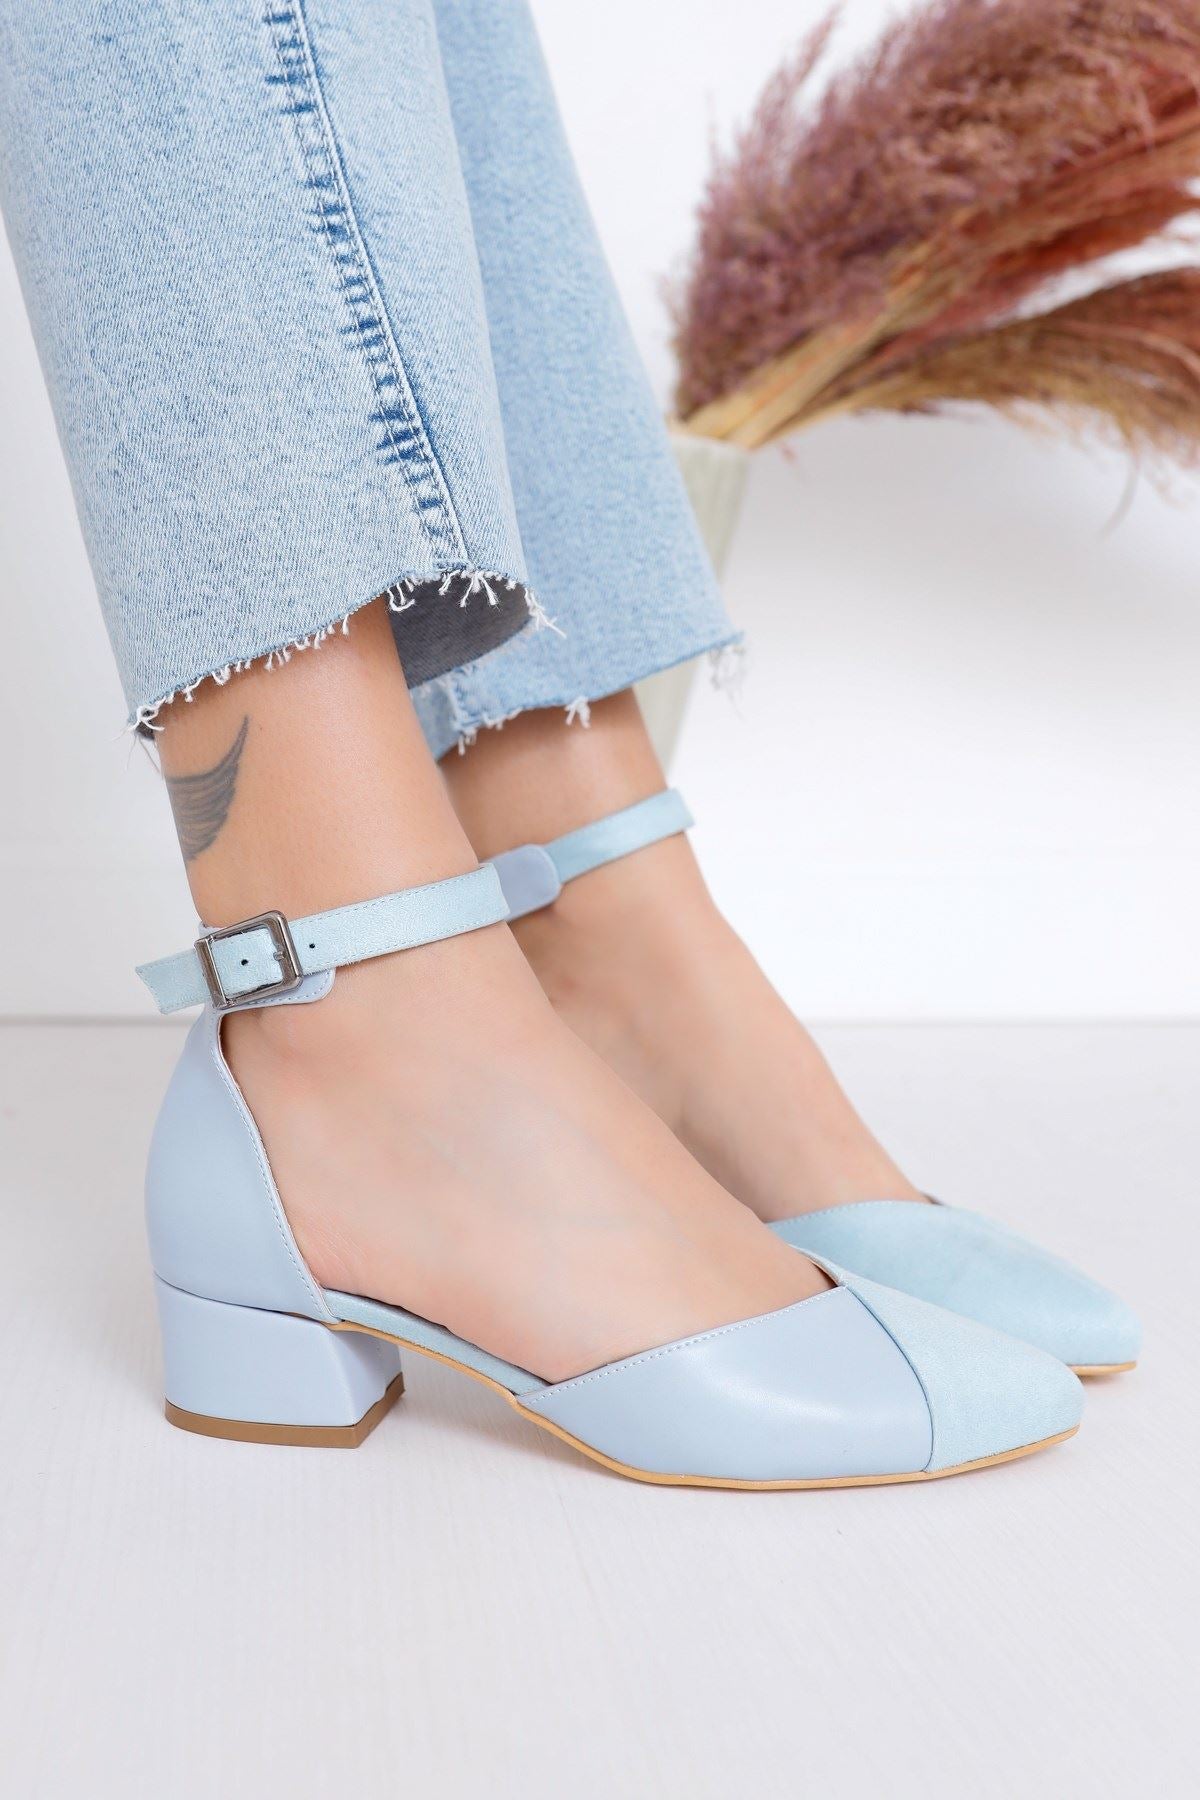 Women's Holly Heels Baby Blue Skin-Suede Shoes - STREETMODE™